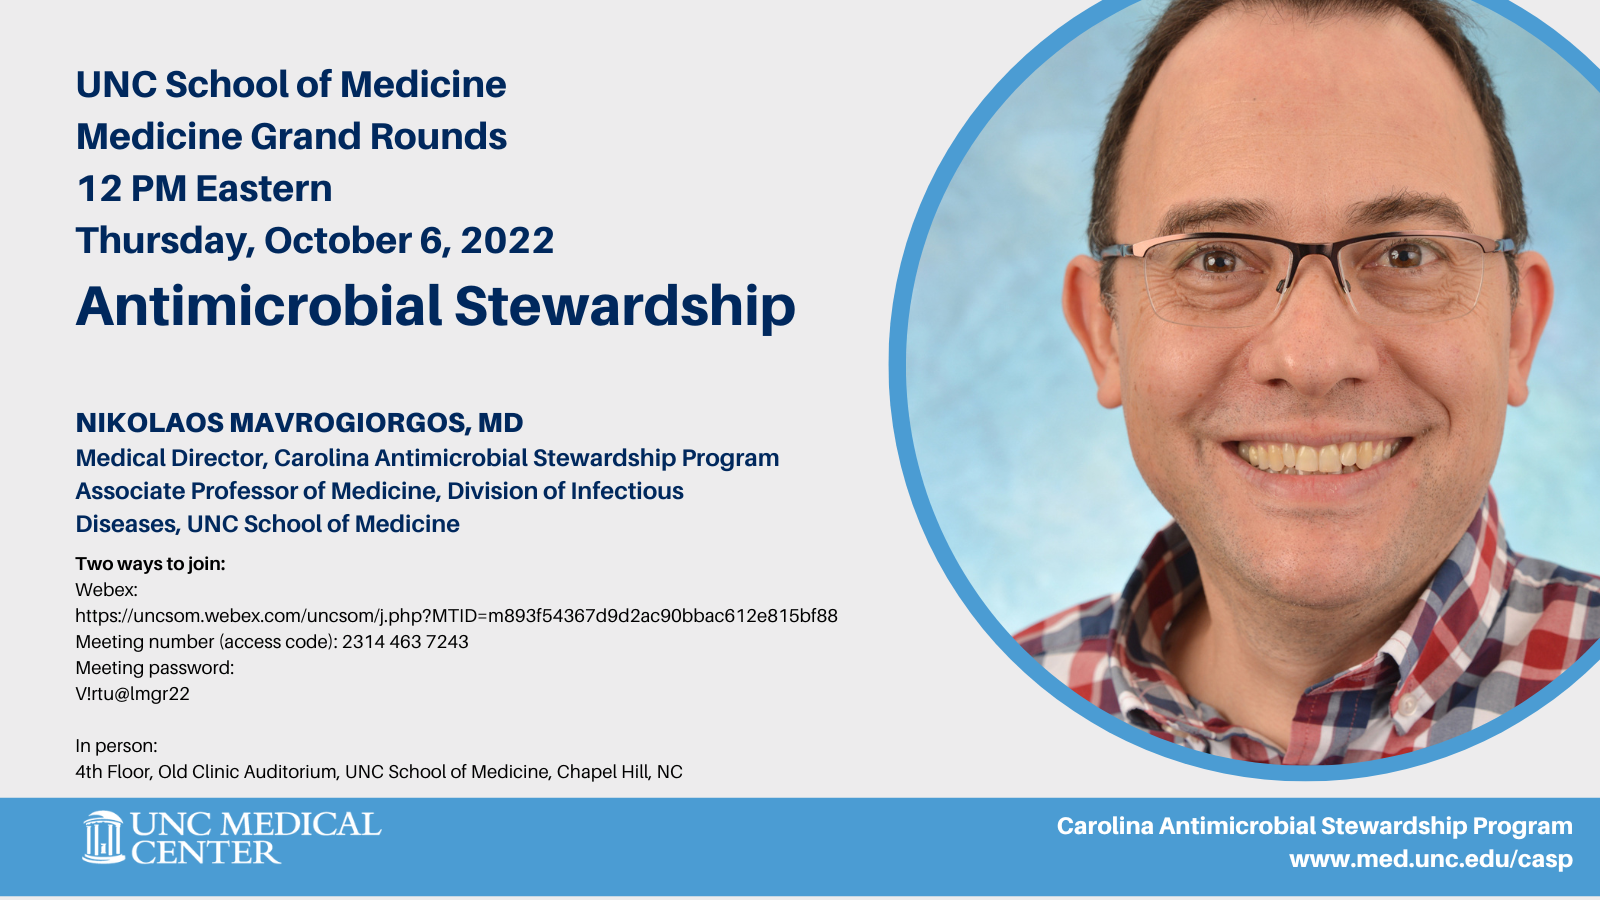 UNC School of Medicine Medicine Grand Rounds 12 PM Eastern Thursday, October 6, 2022 Antimicrobial Stewardship Nikolaos Mavrogiorgos, MD Medical Director, Carolina Antimicrobial Stewardship Program Associate Professor of Medicine, Division of Infectious Diseases, UNC School of Medicine Carolina Antimicrobial Stewardship Program www.med.unc.edu/casp Two ways to join: Webex: https://uncsom.webex.com/uncsom/j.php?MTID=m893f54367d9d2ac90bbac612e815bf88 Meeting number (access code): 2314 463 7243 Meeting password: V!rtu@lmgr22 In person: 4th Floor, Old Clinic Auditorium, UNC School of Medicine, Chapel Hill, NC